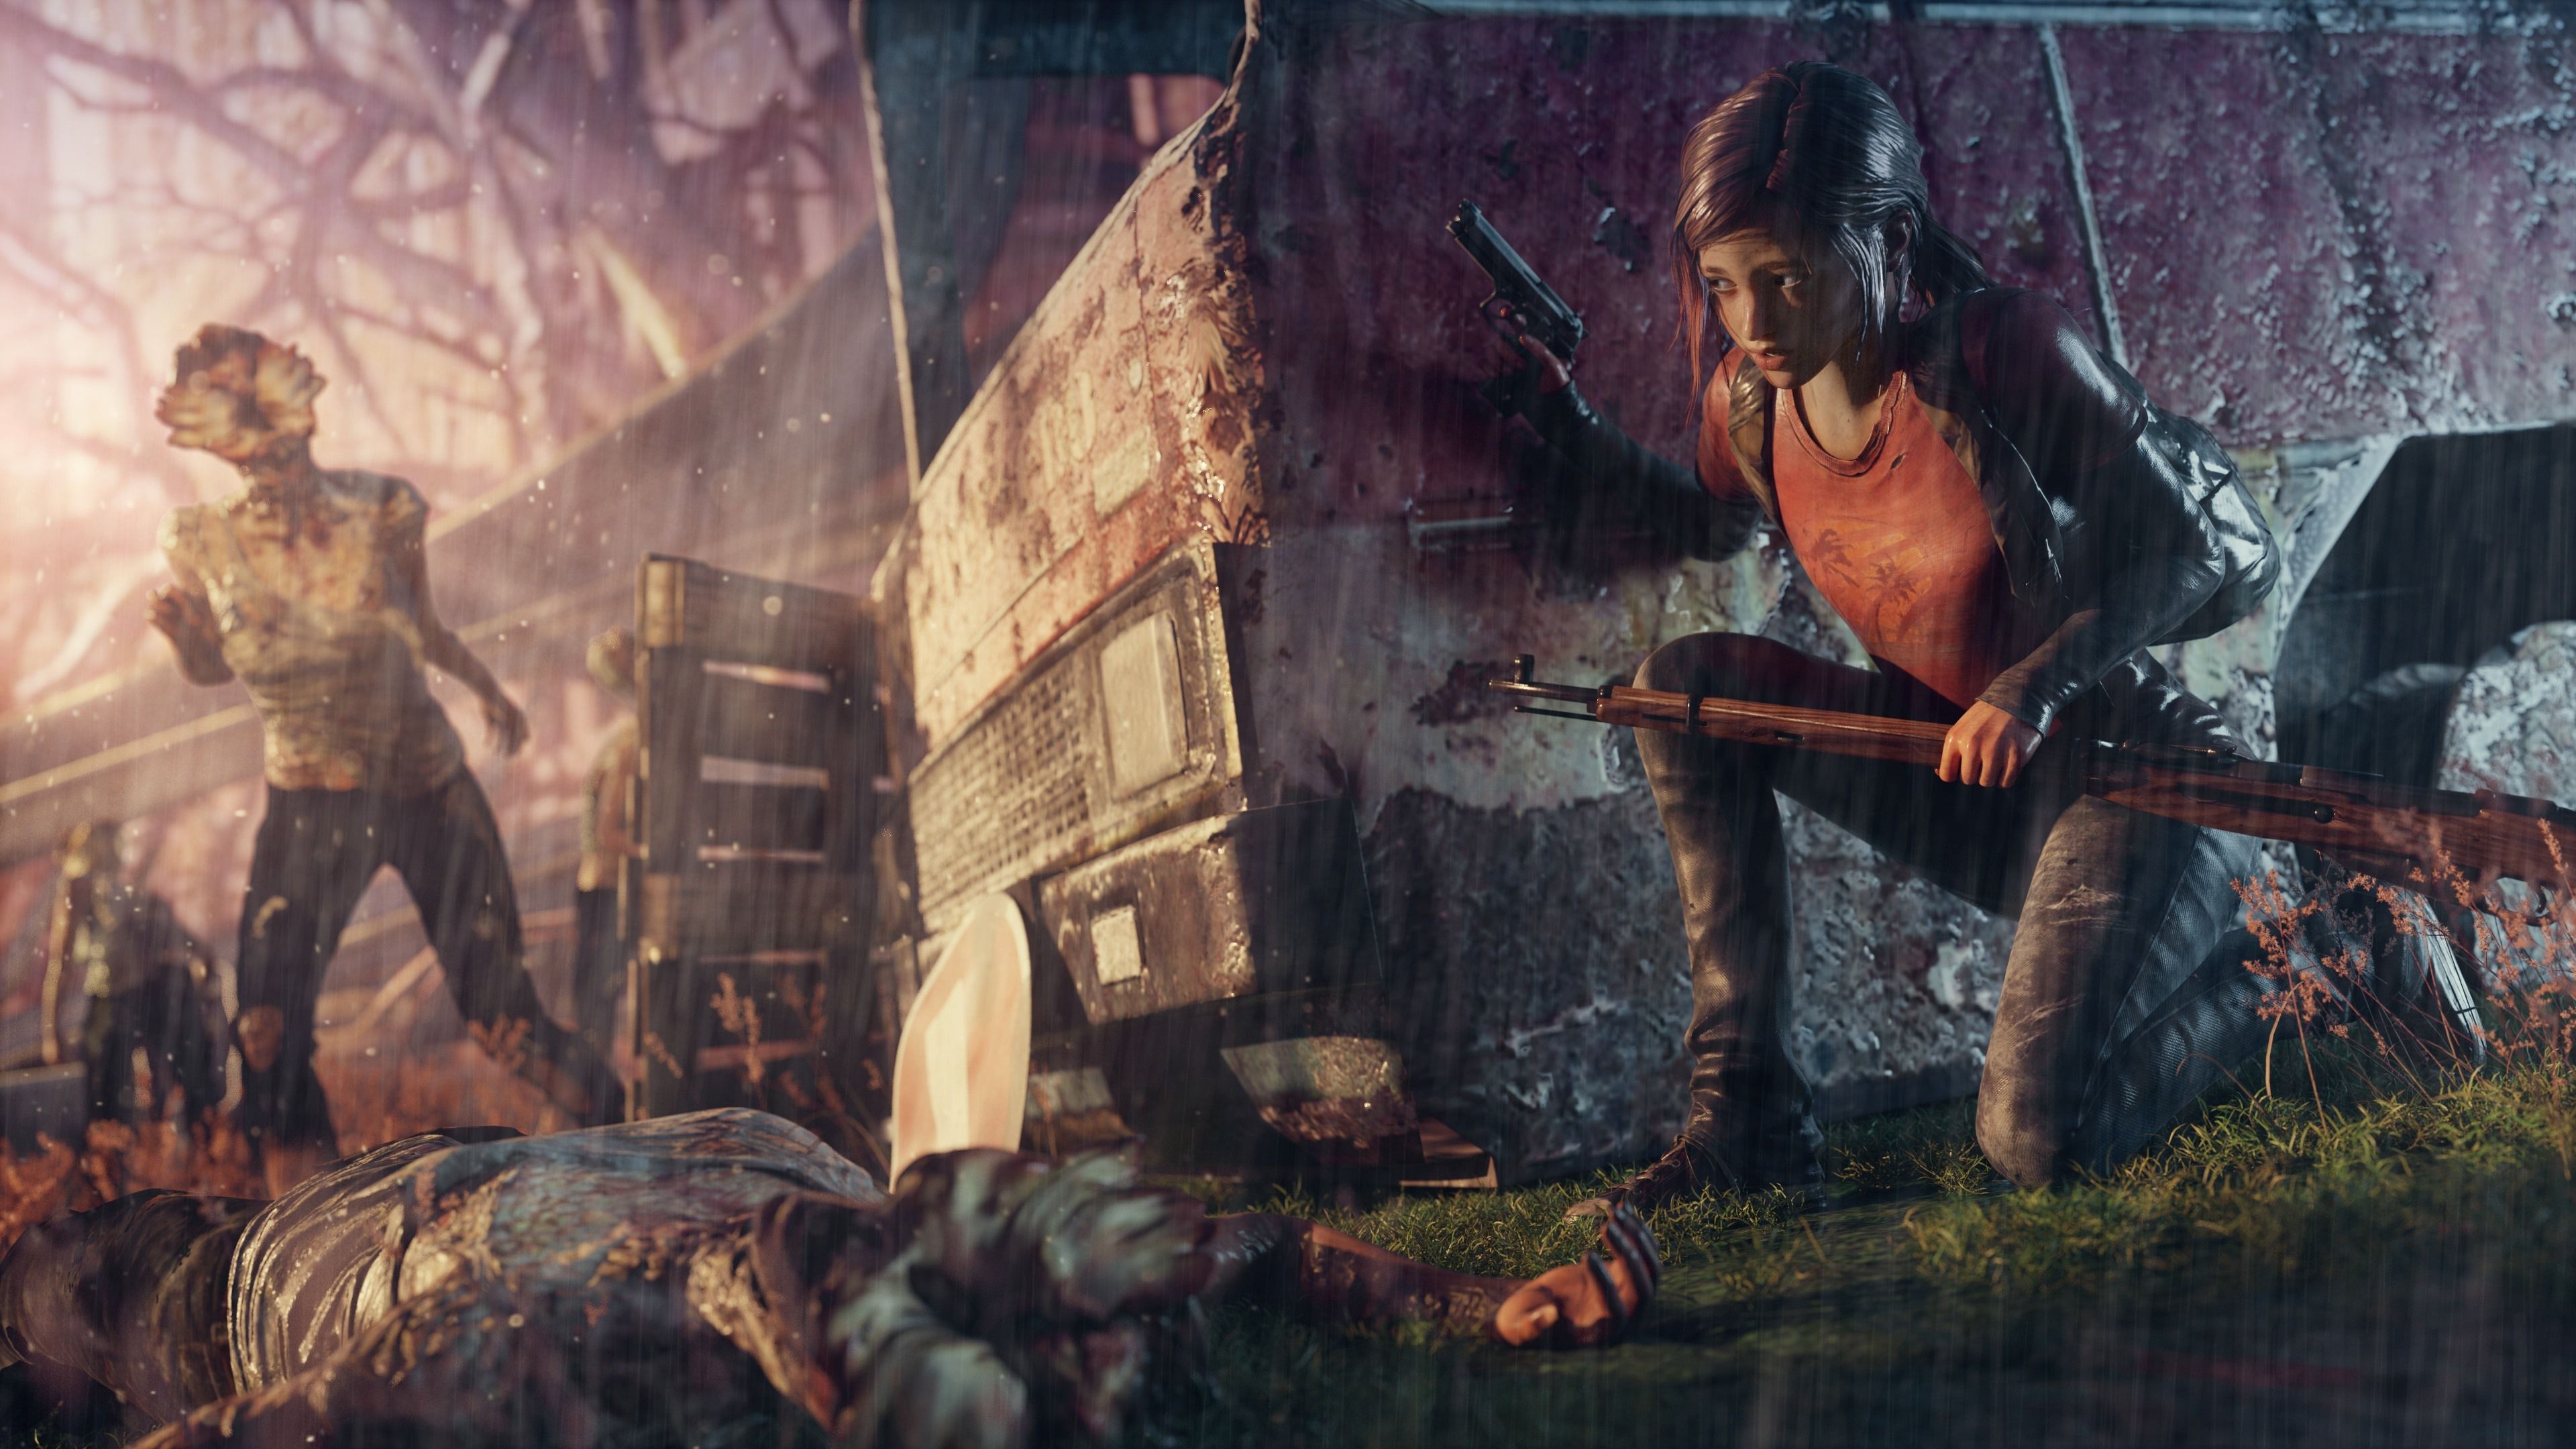 Wallpaper : The Last of Us, PC gaming, overgrown, zombie